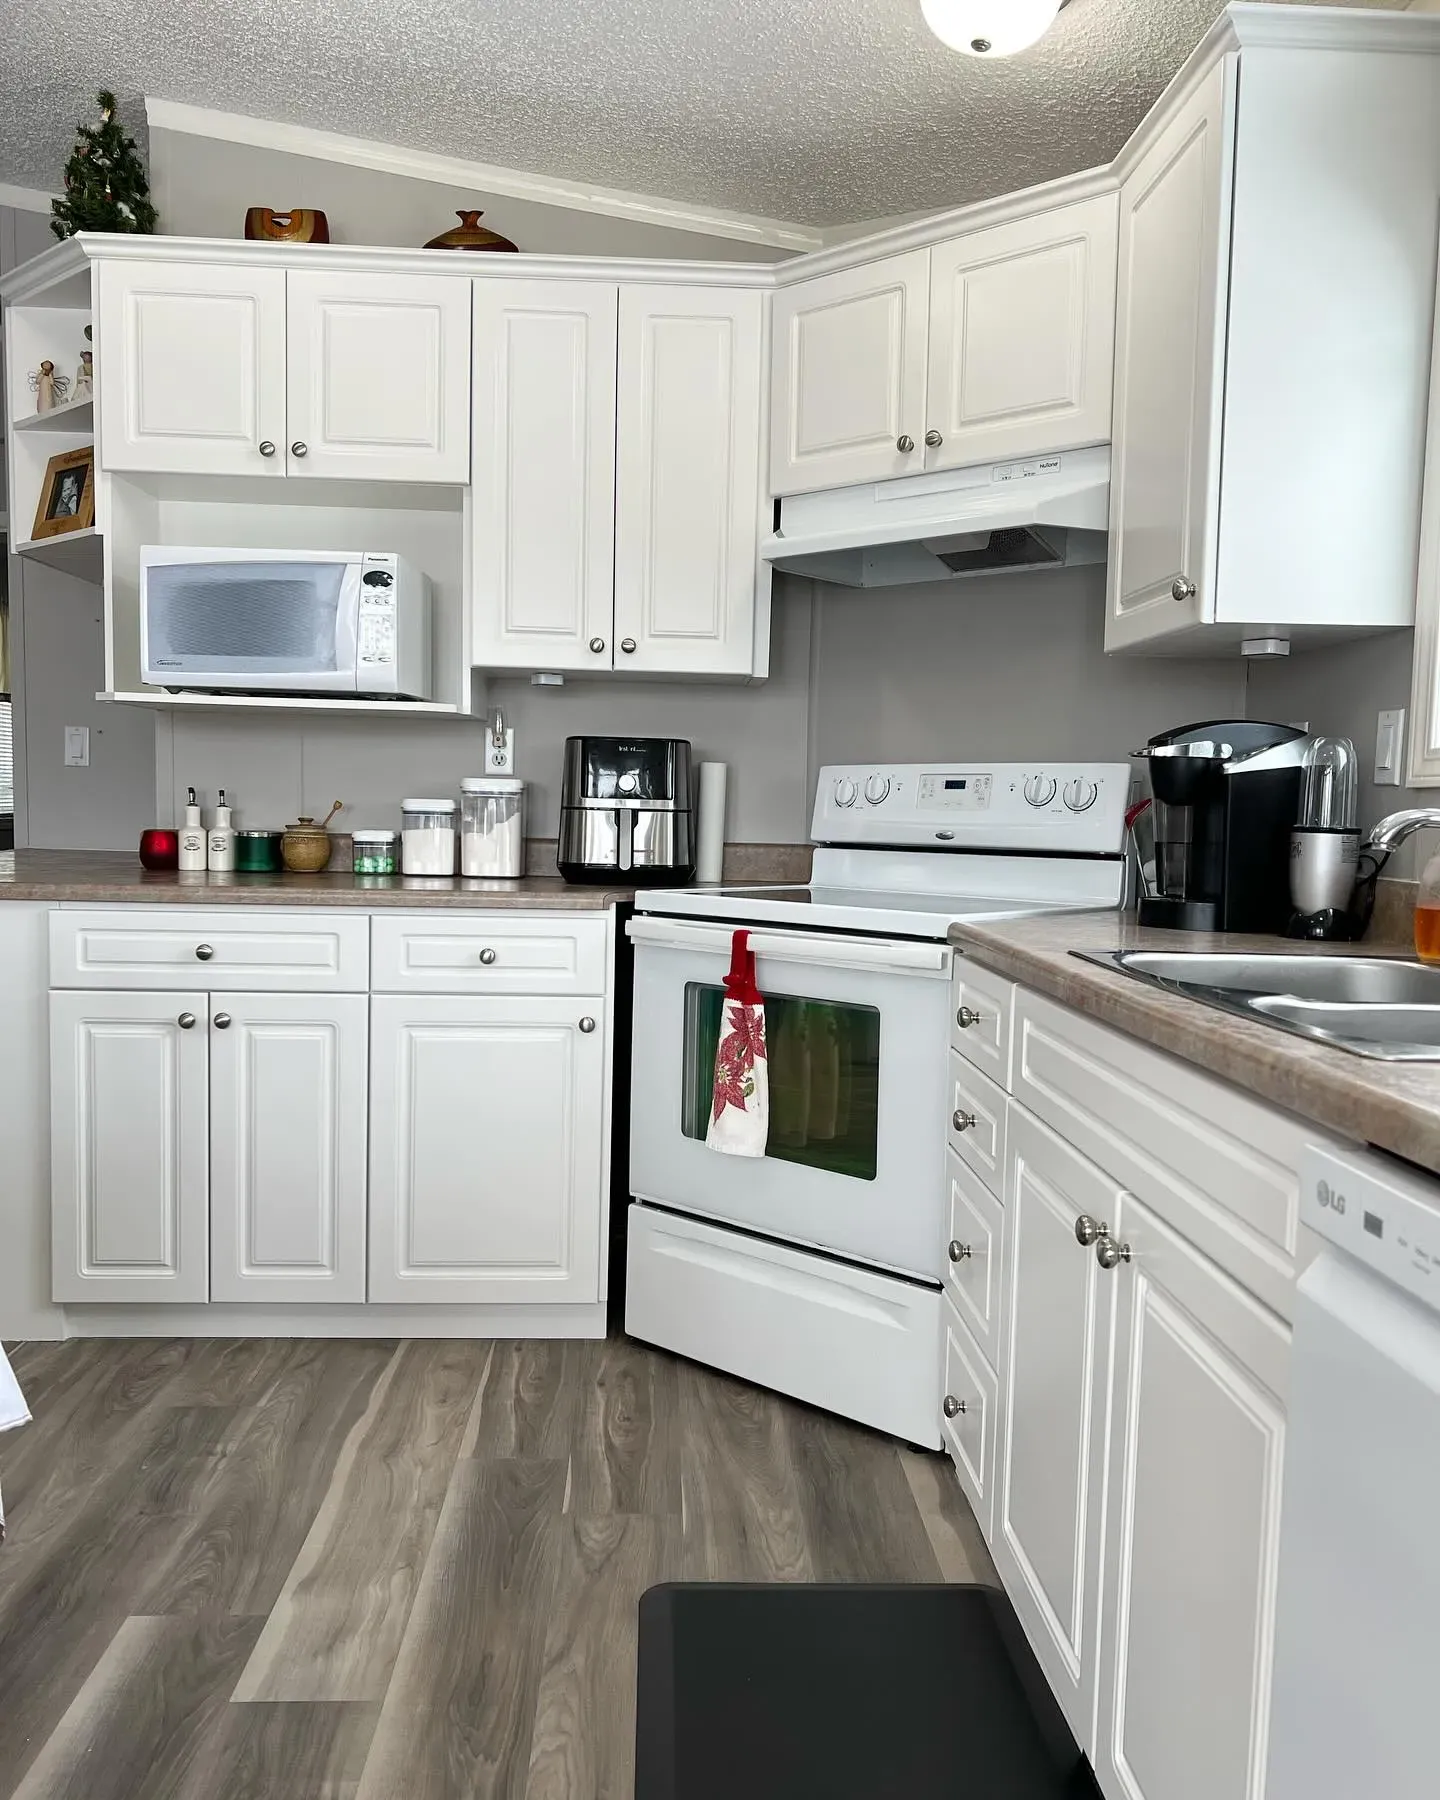 Behr Silky White kitchen cabinets color paint